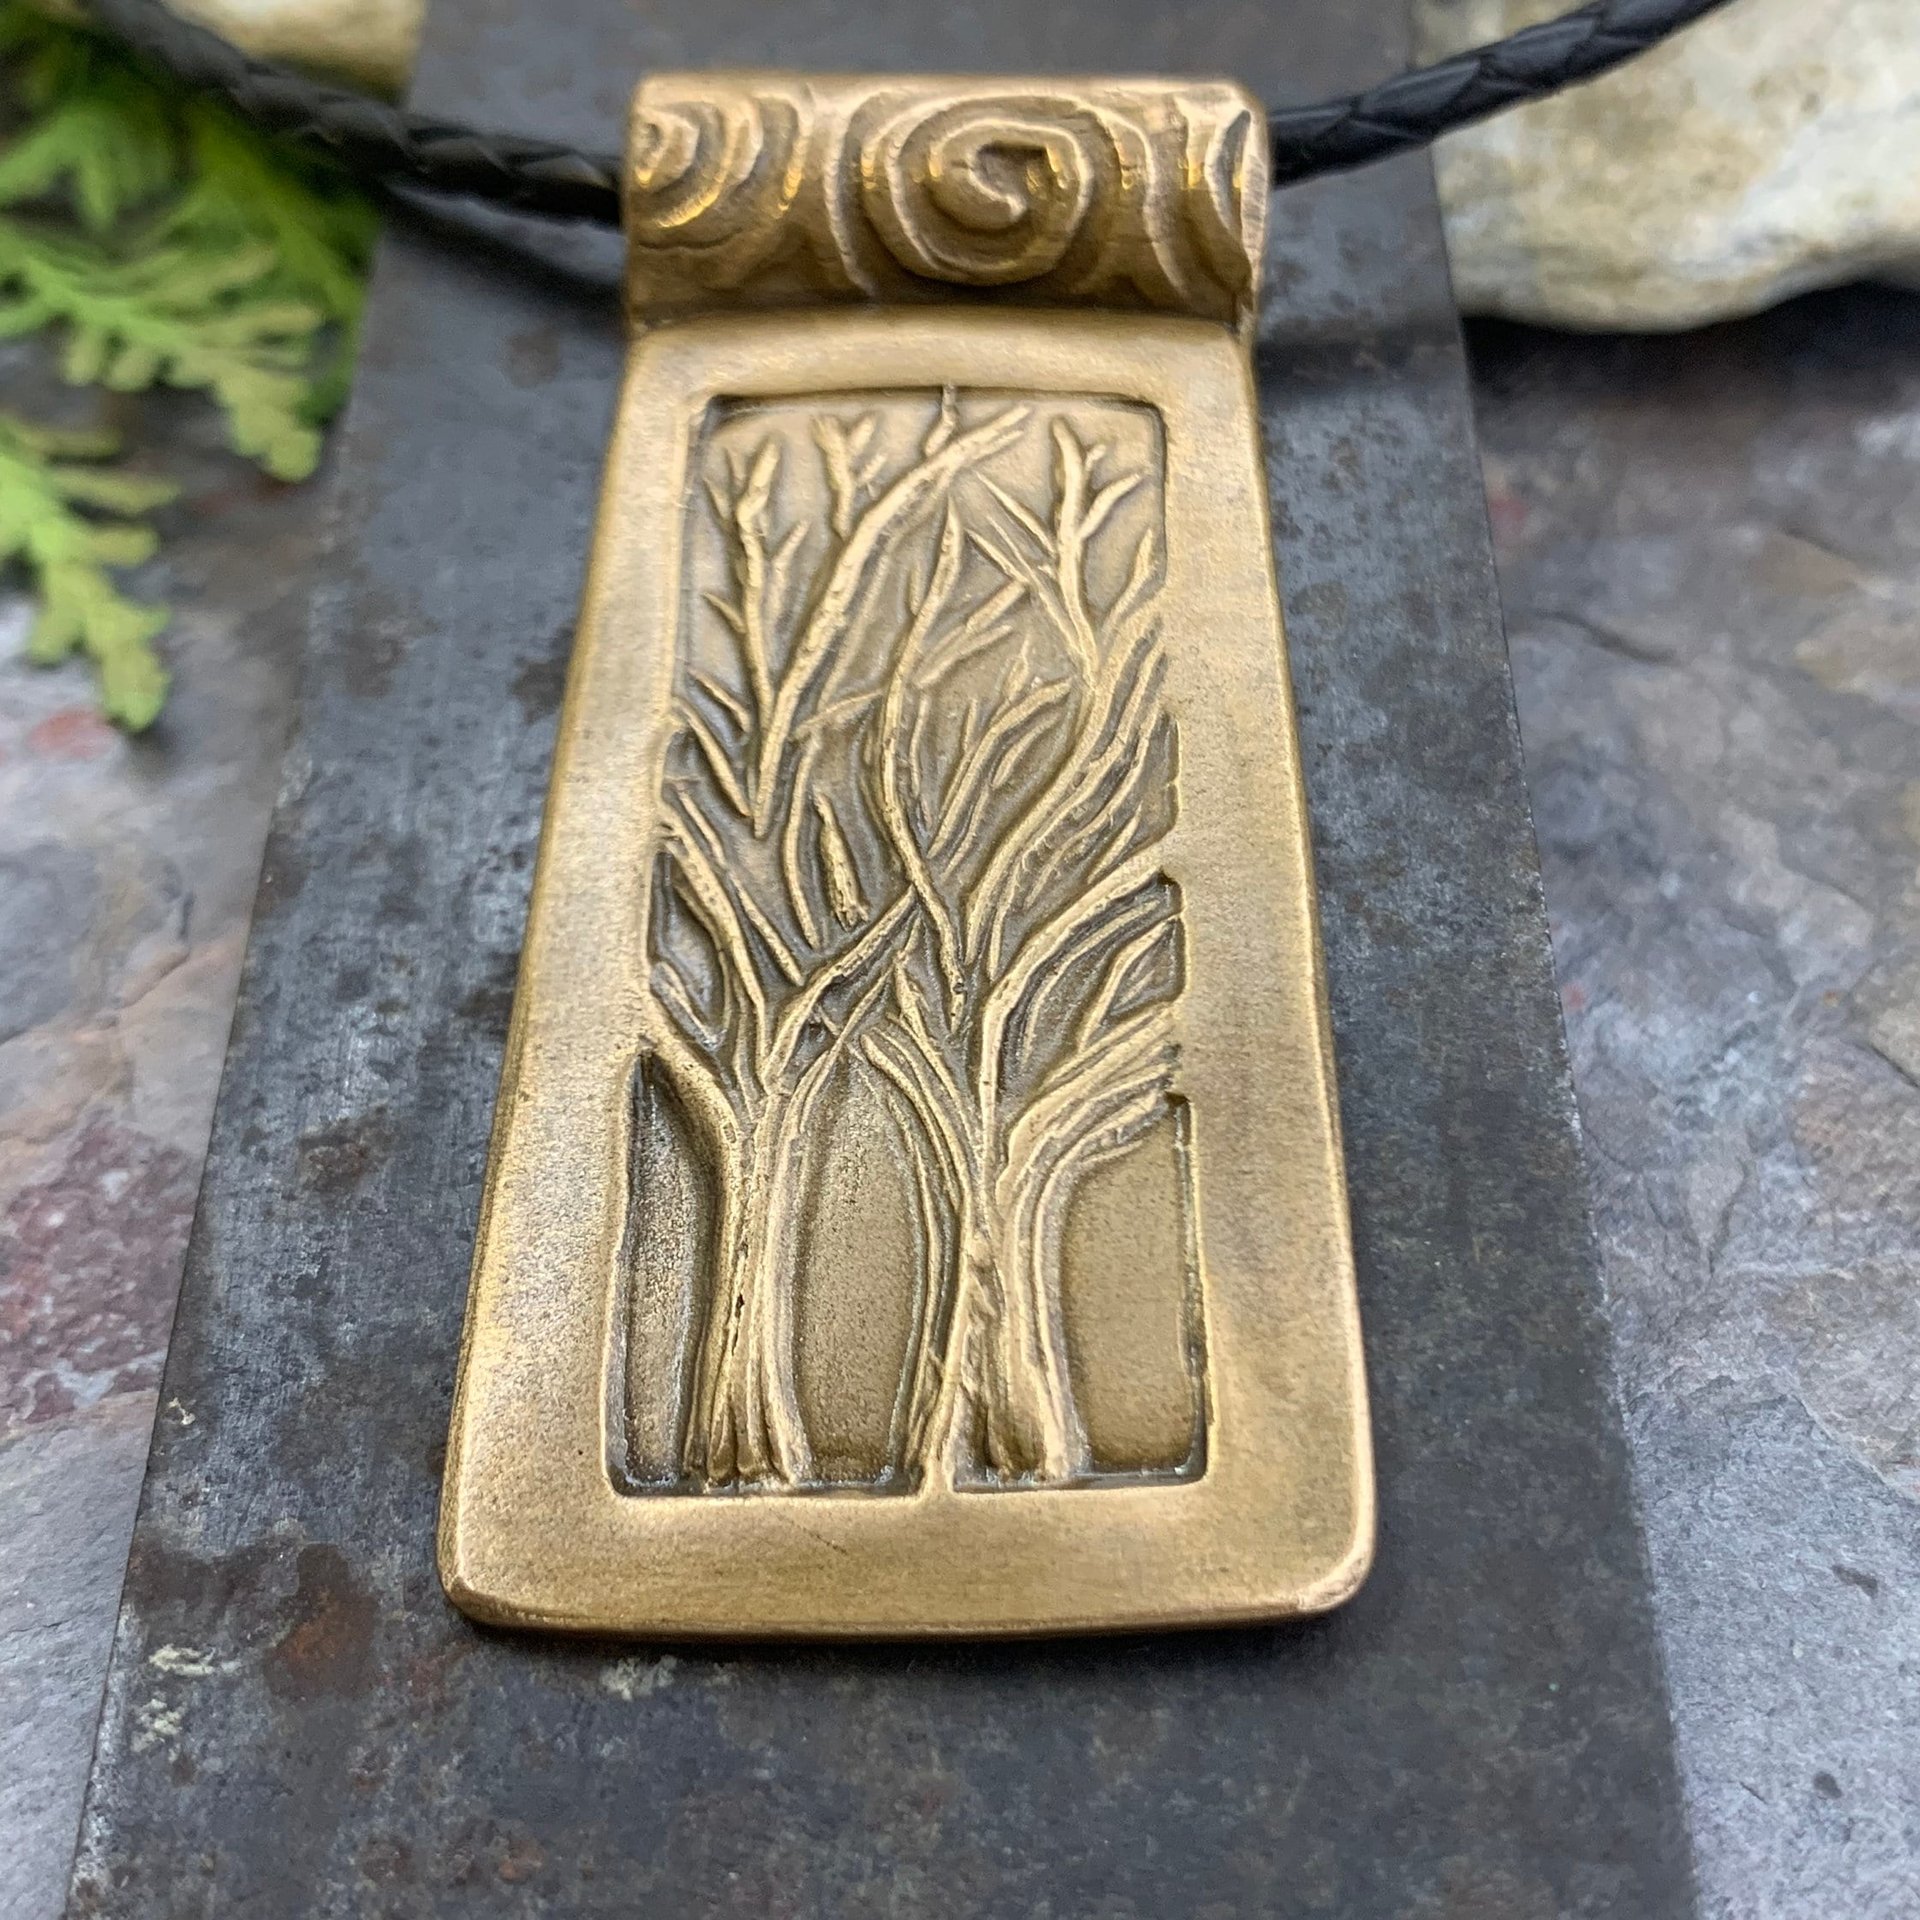 Two Trees Bronze Pendant, Celtic Tree of Life, Hand Carved, Irish Celtic Spirals, Intertwined, Handmade Art Jewelry, 8th Anniversary Gifts